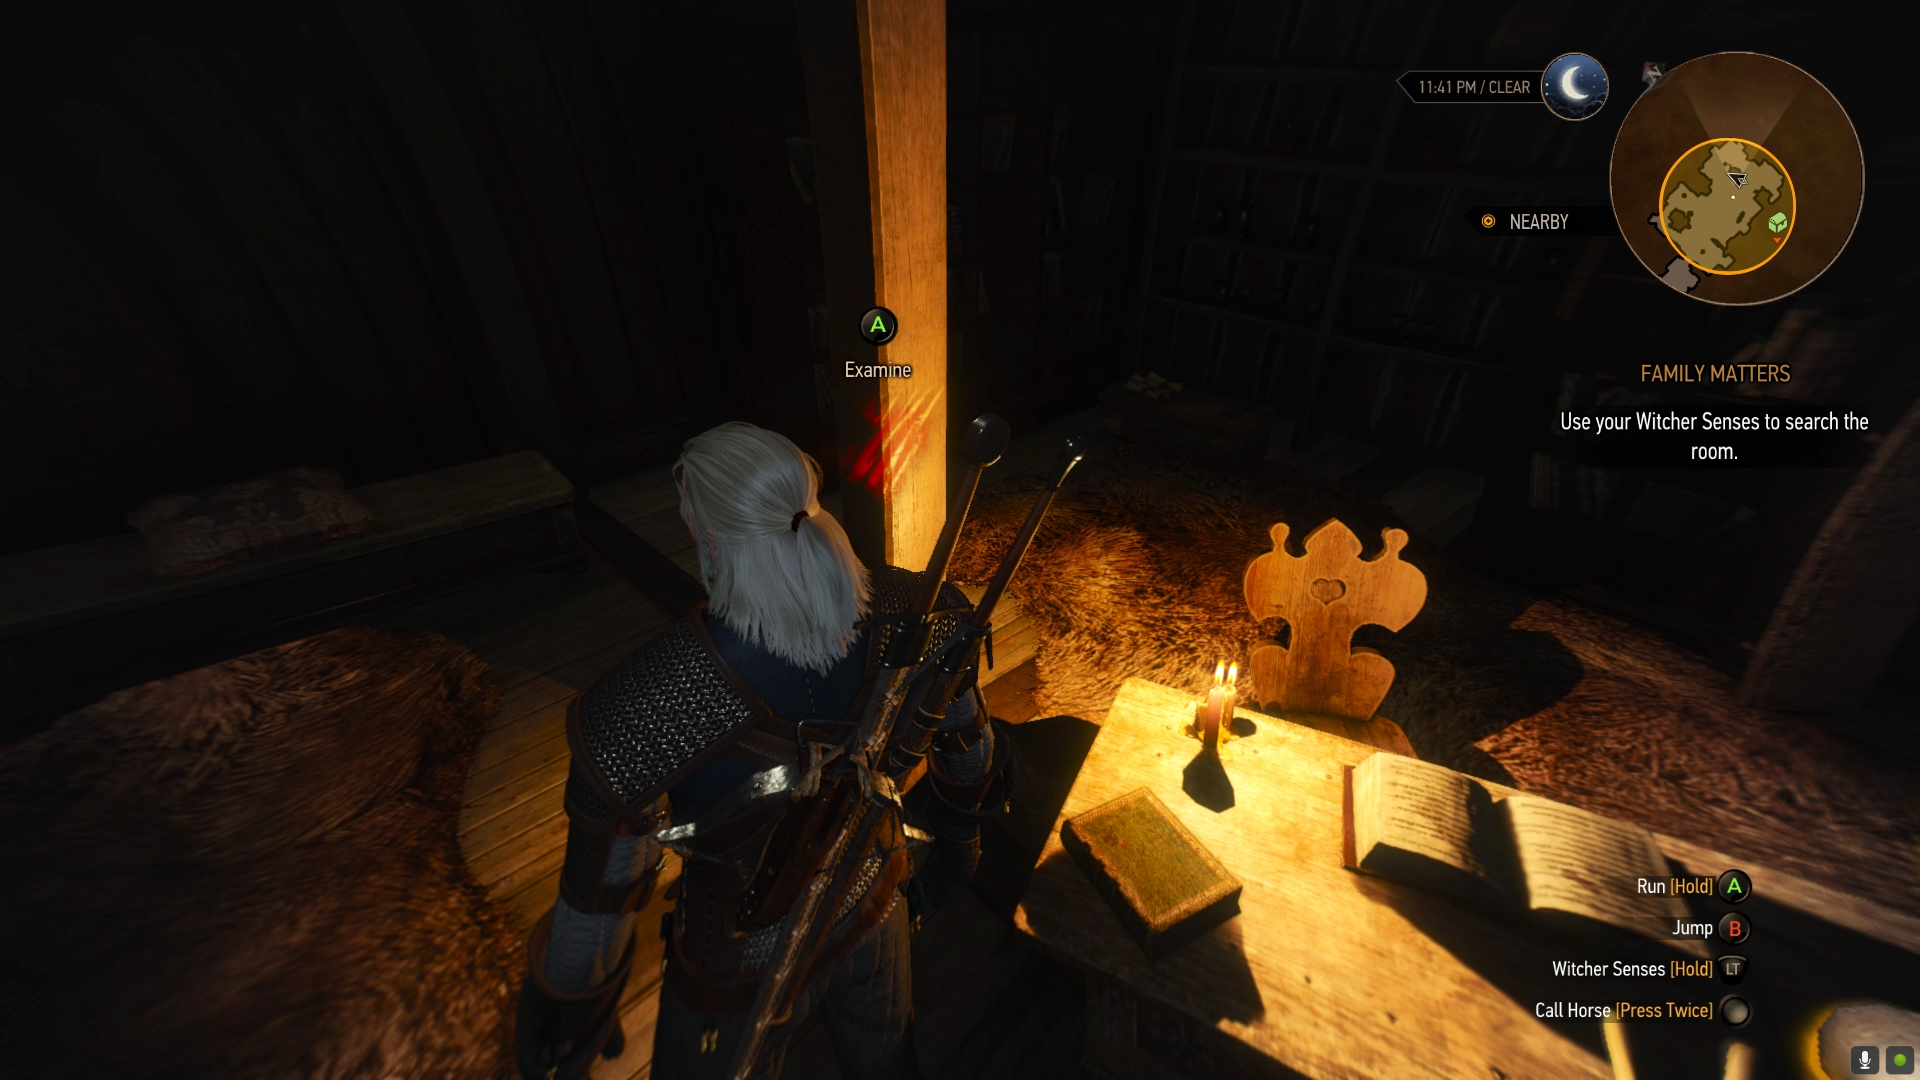 The Witcher 3 Strategy： Family Matters (Main Quest) – Velen